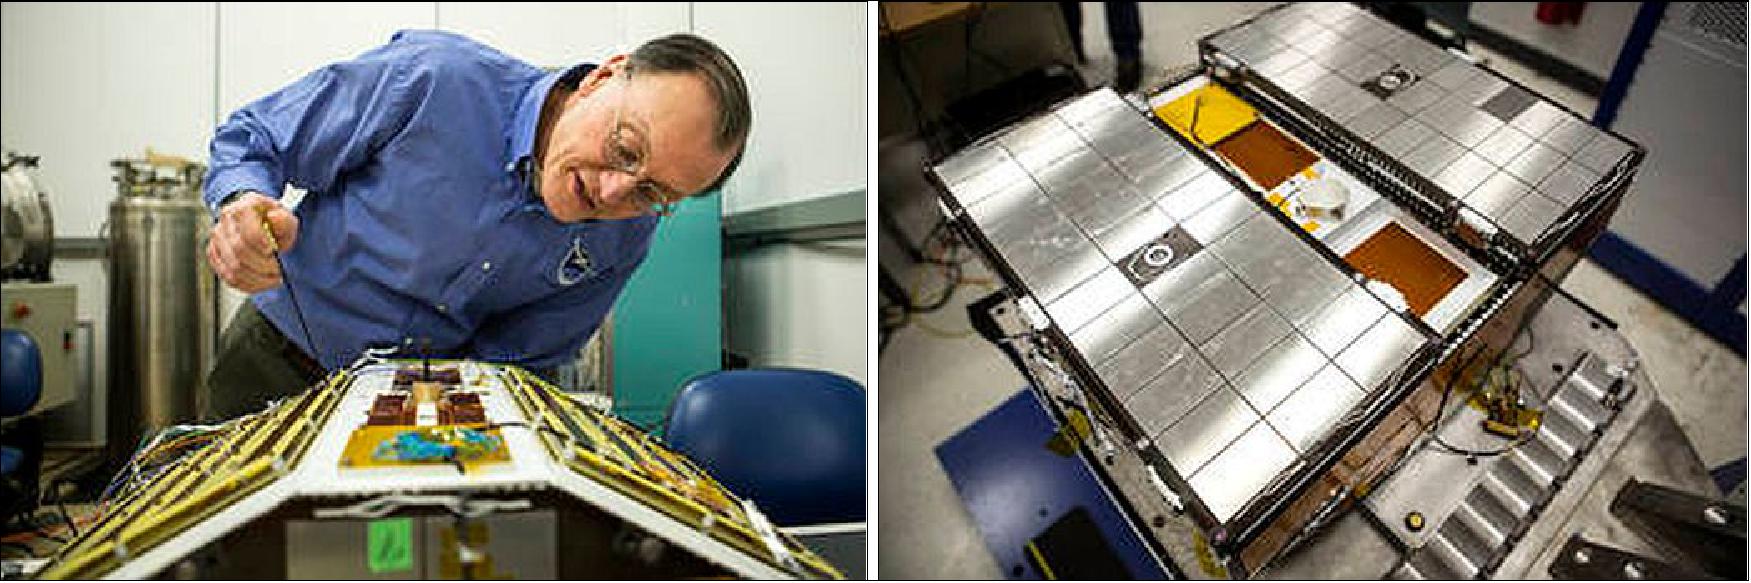 Figure 7: Left: Christopher Ruf inspects the CYGNSS spacecraft in Feb. 2015; Right: Jonathan Van Noord of UM calibrates CYGNSS in the lab in December 2014 (image credit: UM, Joseph Xu) 18)